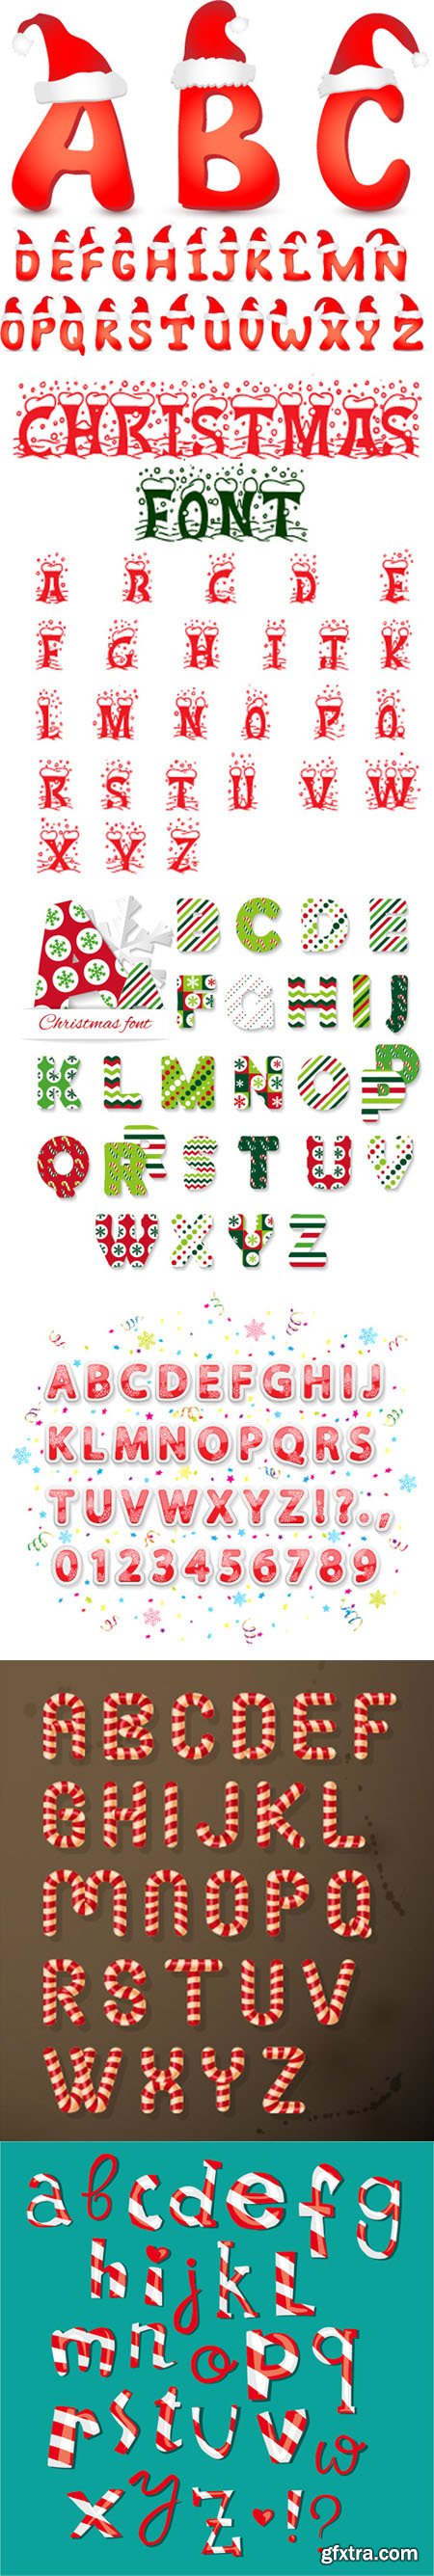 Christmas Alphabets with Numbers in Vector